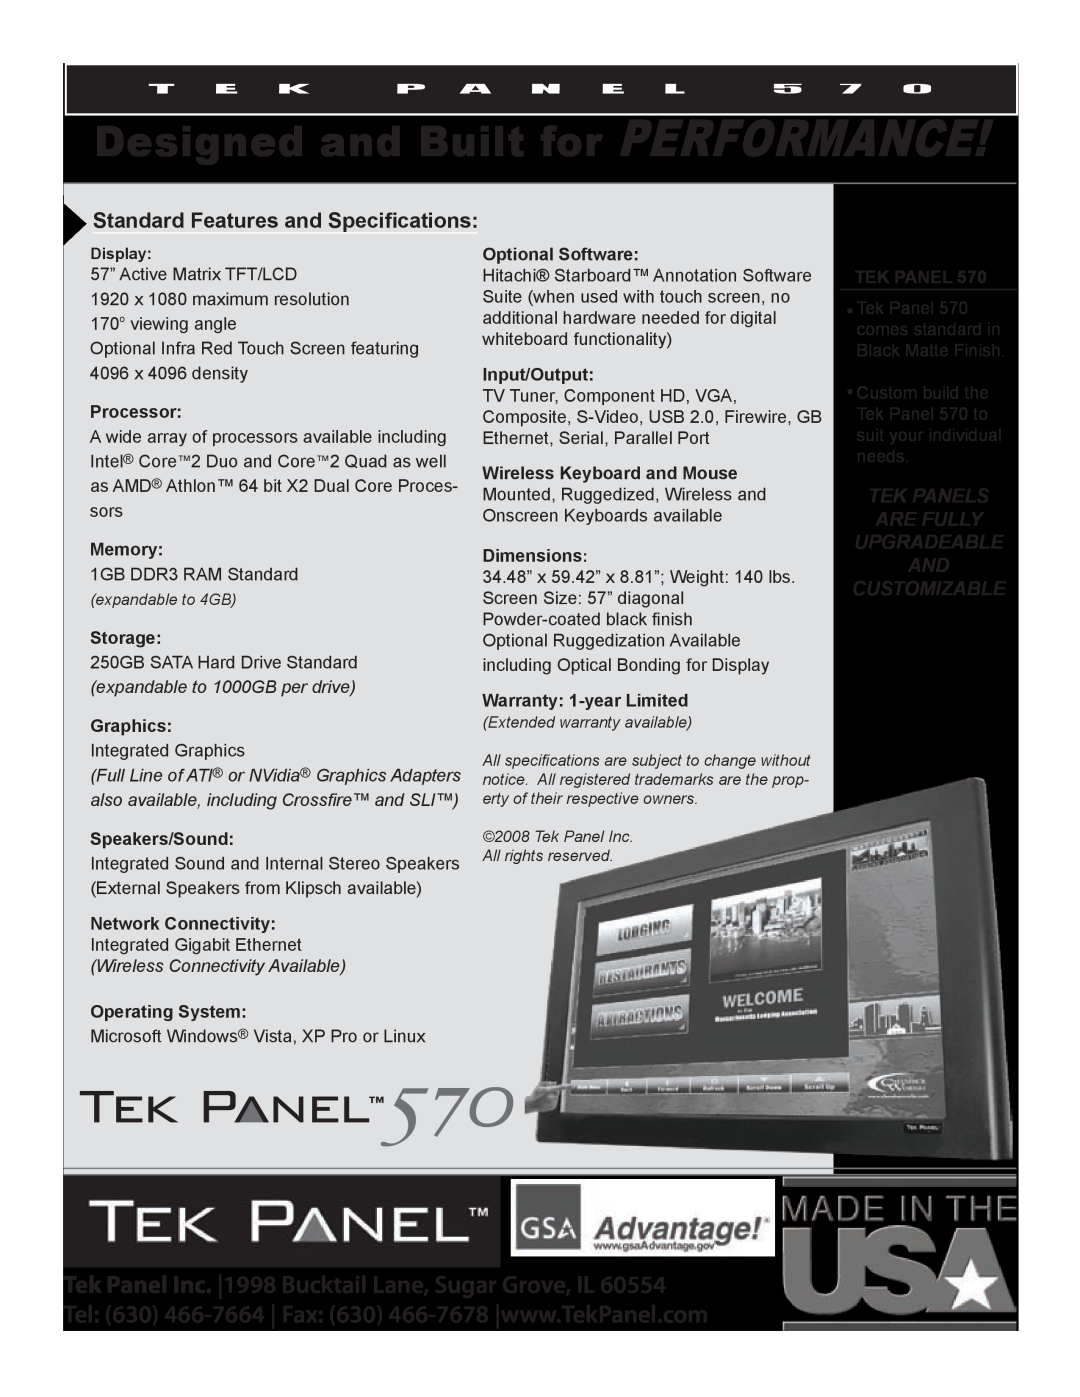 Hy-Tek Manufacturing Tek Panel 570 manual Designed and Built for PERFORMANCE, Standard Features and Specifications 